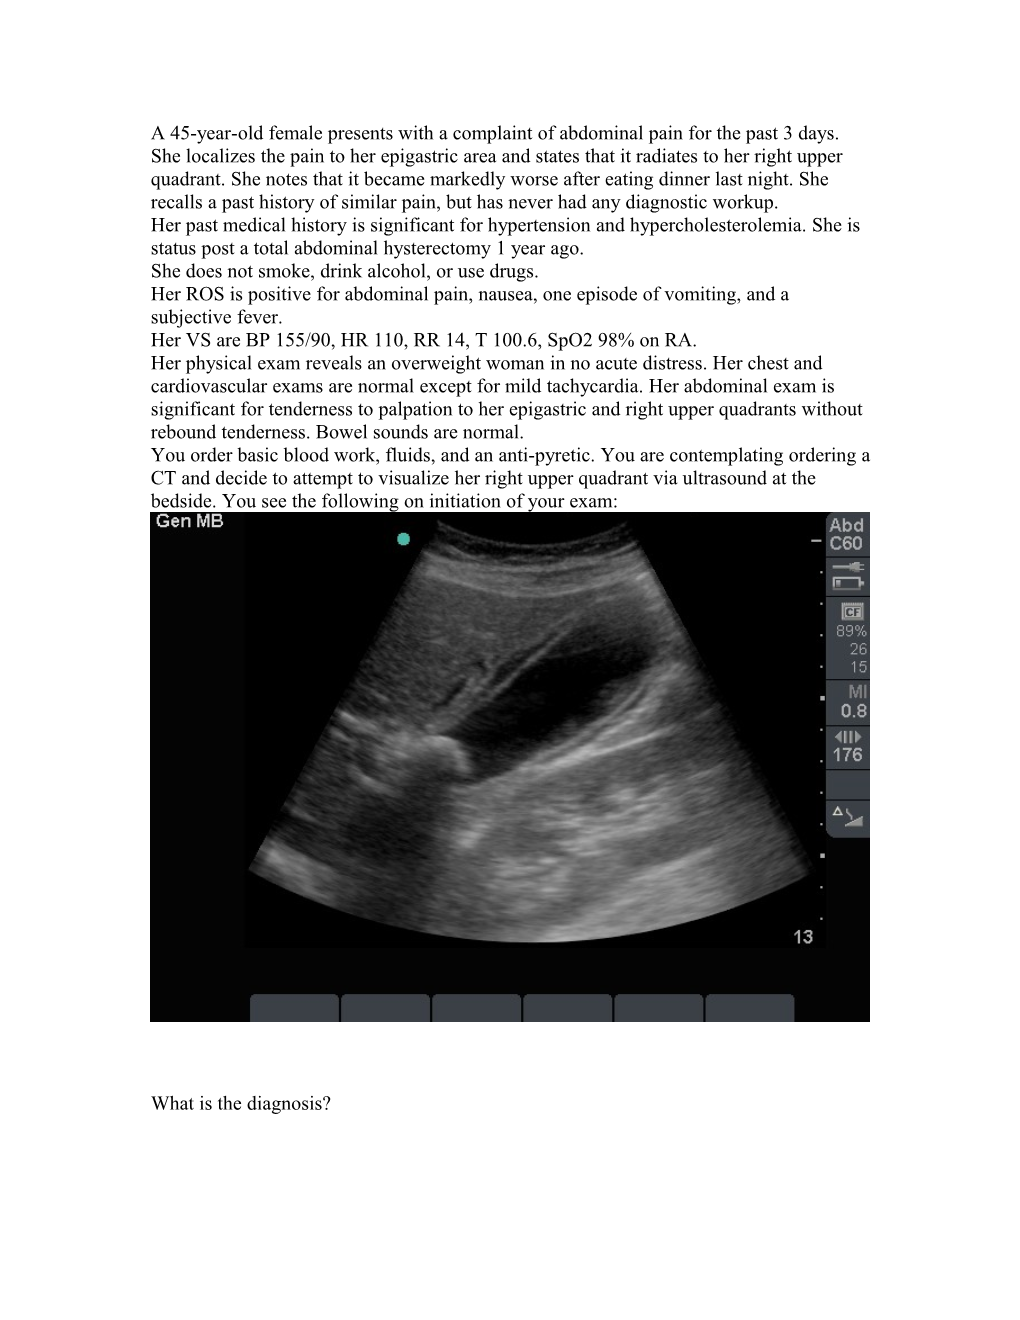 A 45 Year Old Female Presents with a Complaint of Abdominal Pain for the Past 3 Days